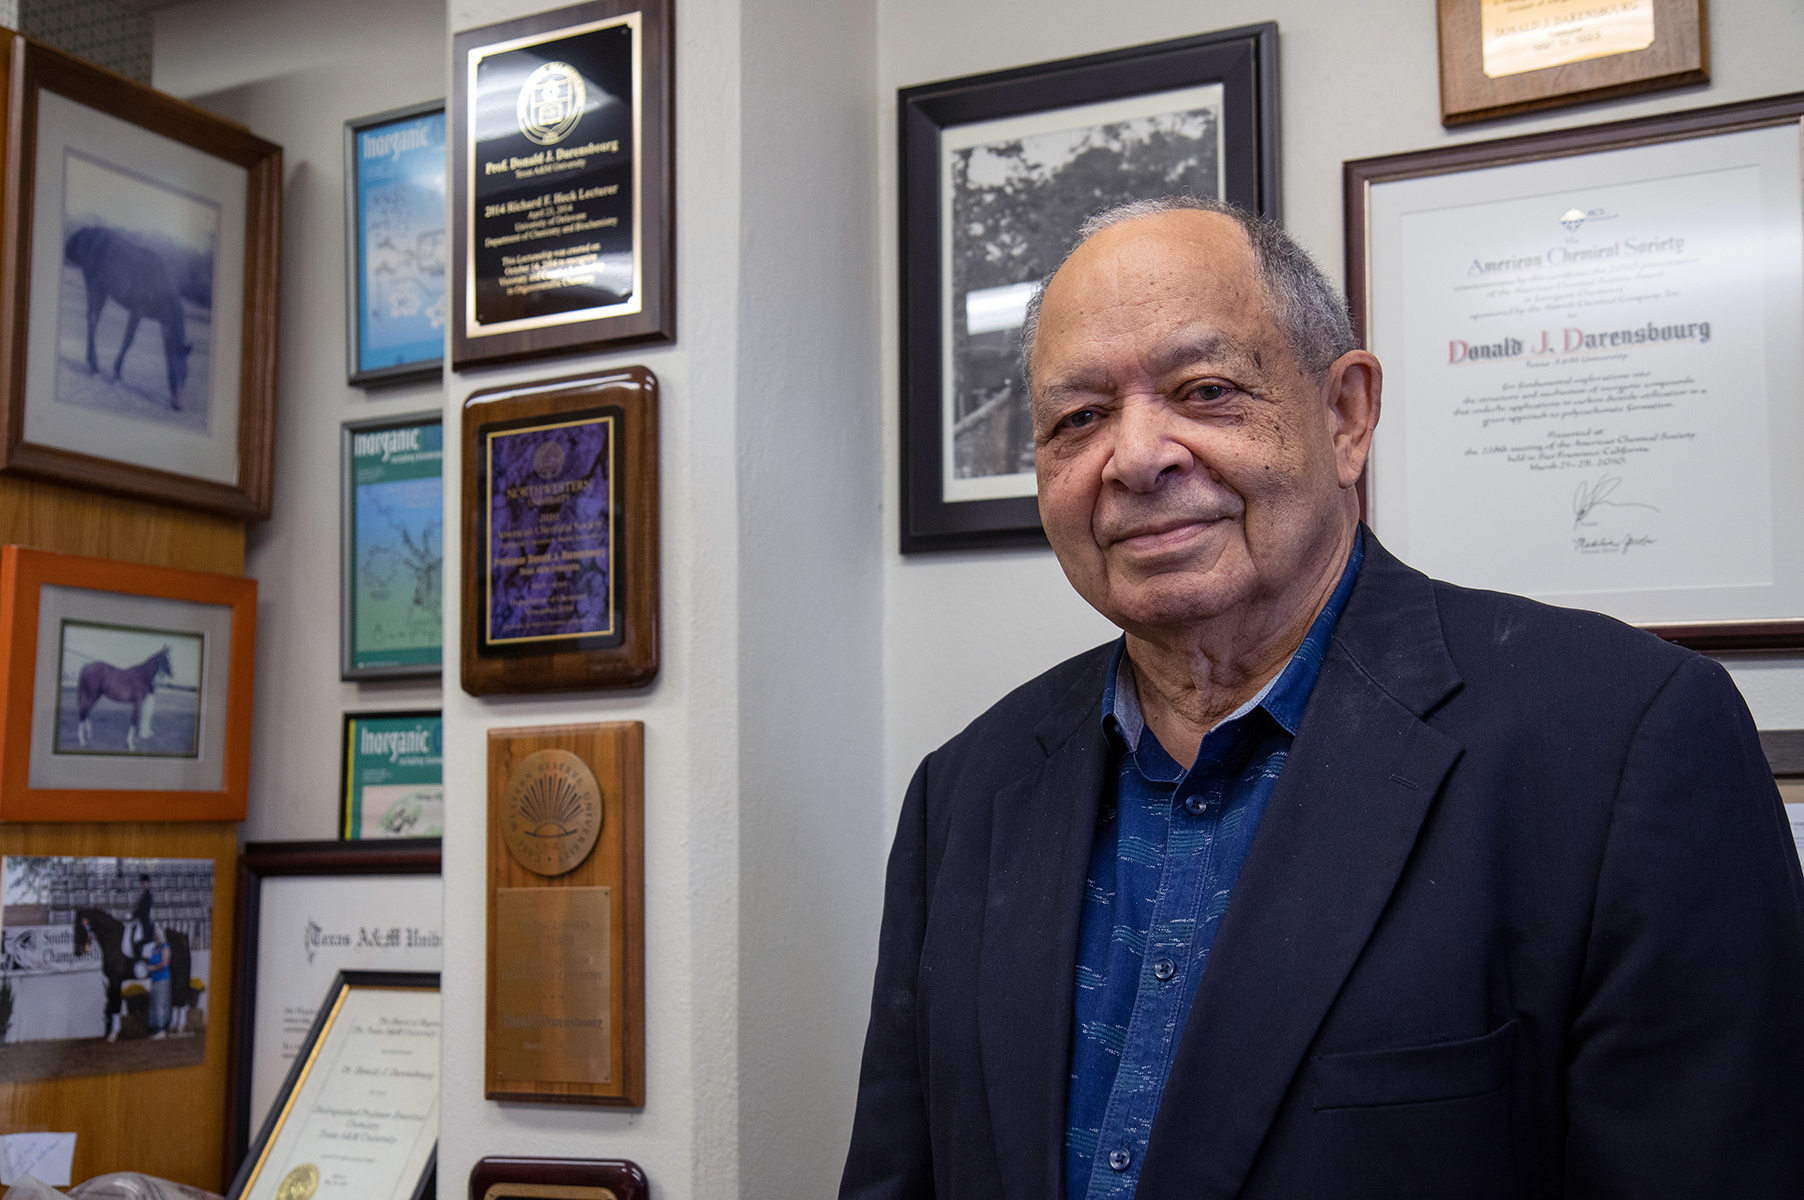 Texas A&M chemist Donald Darensbourg pictured in his office within the Texas A&M Chemistry Building